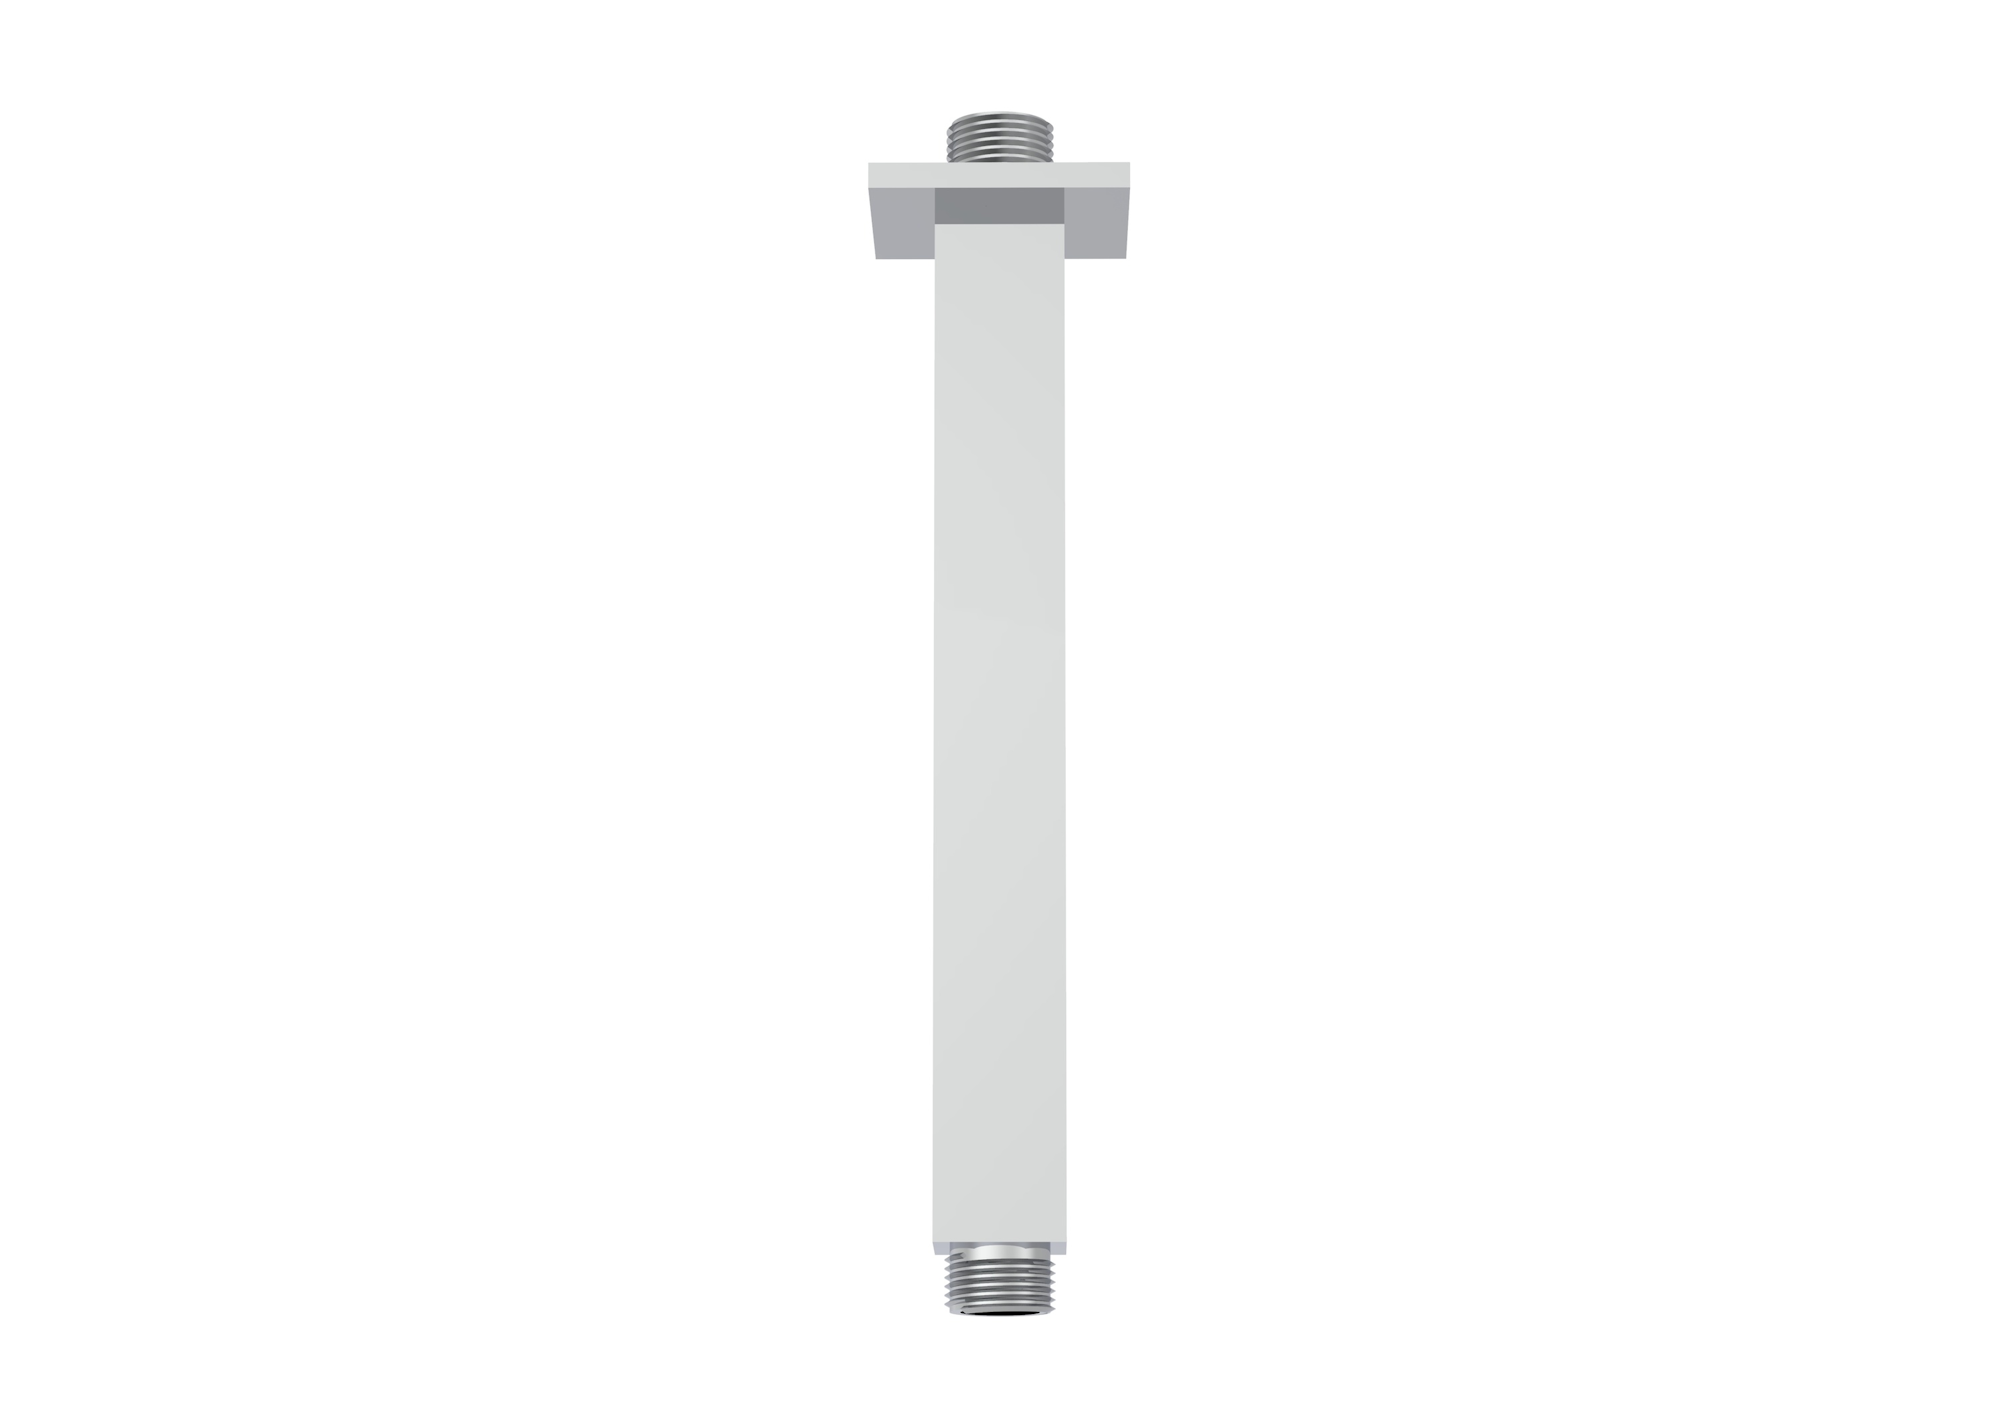 TOOGA 200mm square ceiling mounted shower arm - Chrome